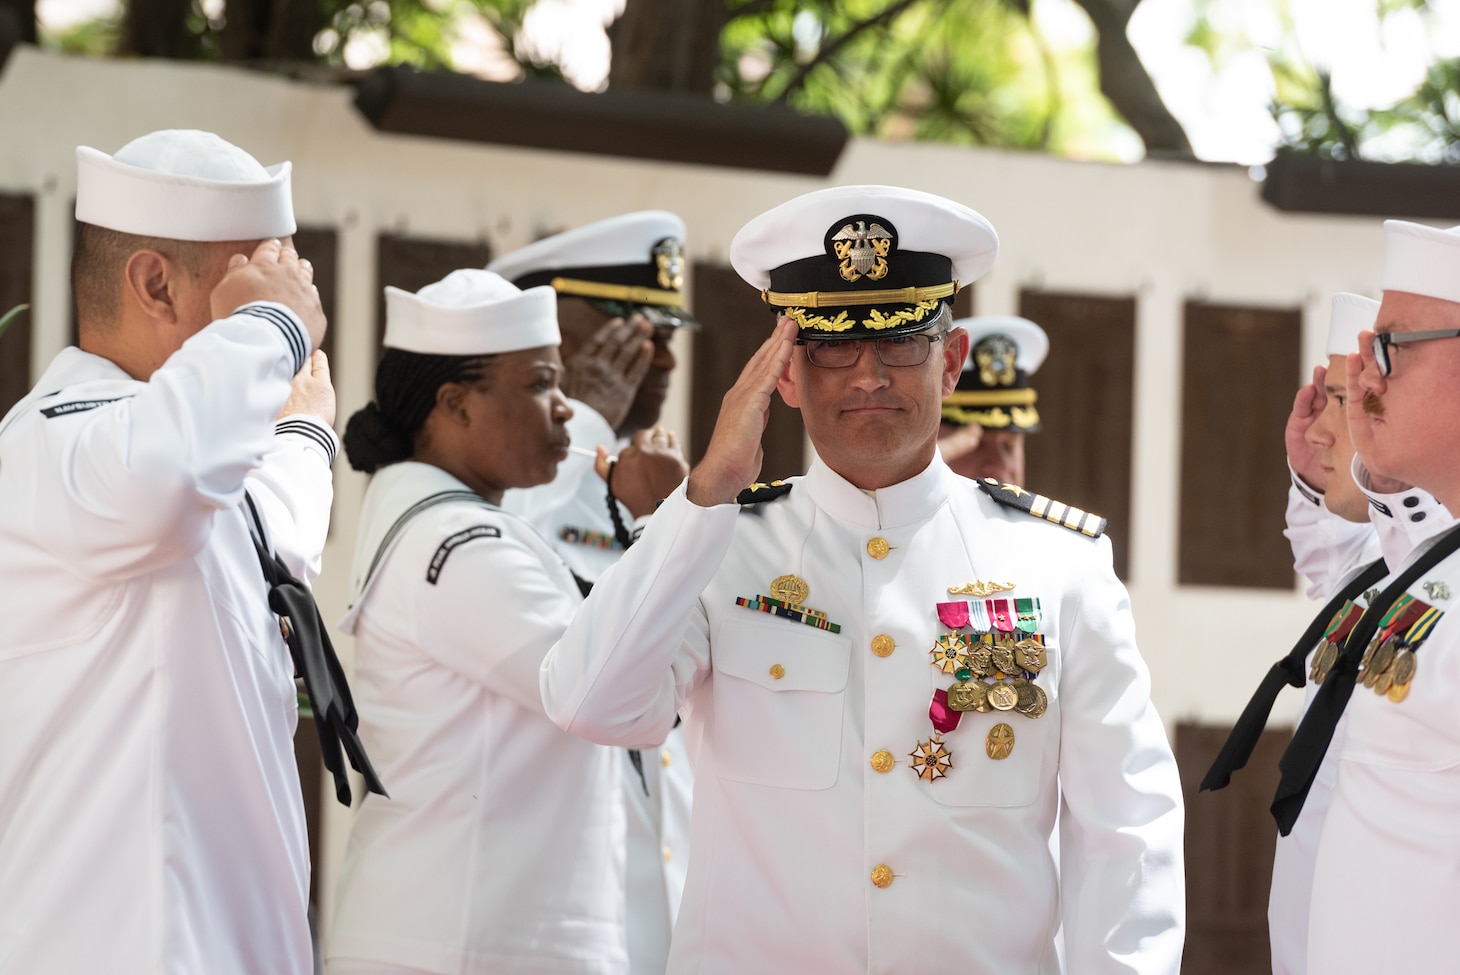 190604-N-KC128-0280 JOINT BASE PEARL HARBOR-HICKAM, Hawaii (June 4, 2019) Capt. Andrew Hertel, salutes after the change of command ceremony of Naval Submarine Training Center Pacific (NSTCP) at Parche Memorial on Joint Base Pearl Harbor-Hickam, Hawaii, June 4, 2019. Capt. Andrew Hertel, was relieved by Capt. Lance Thompson, after more than 30 months in command. (U.S. Navy Photo by Mass Communication Specialist 1st Class Daniel Hinton)